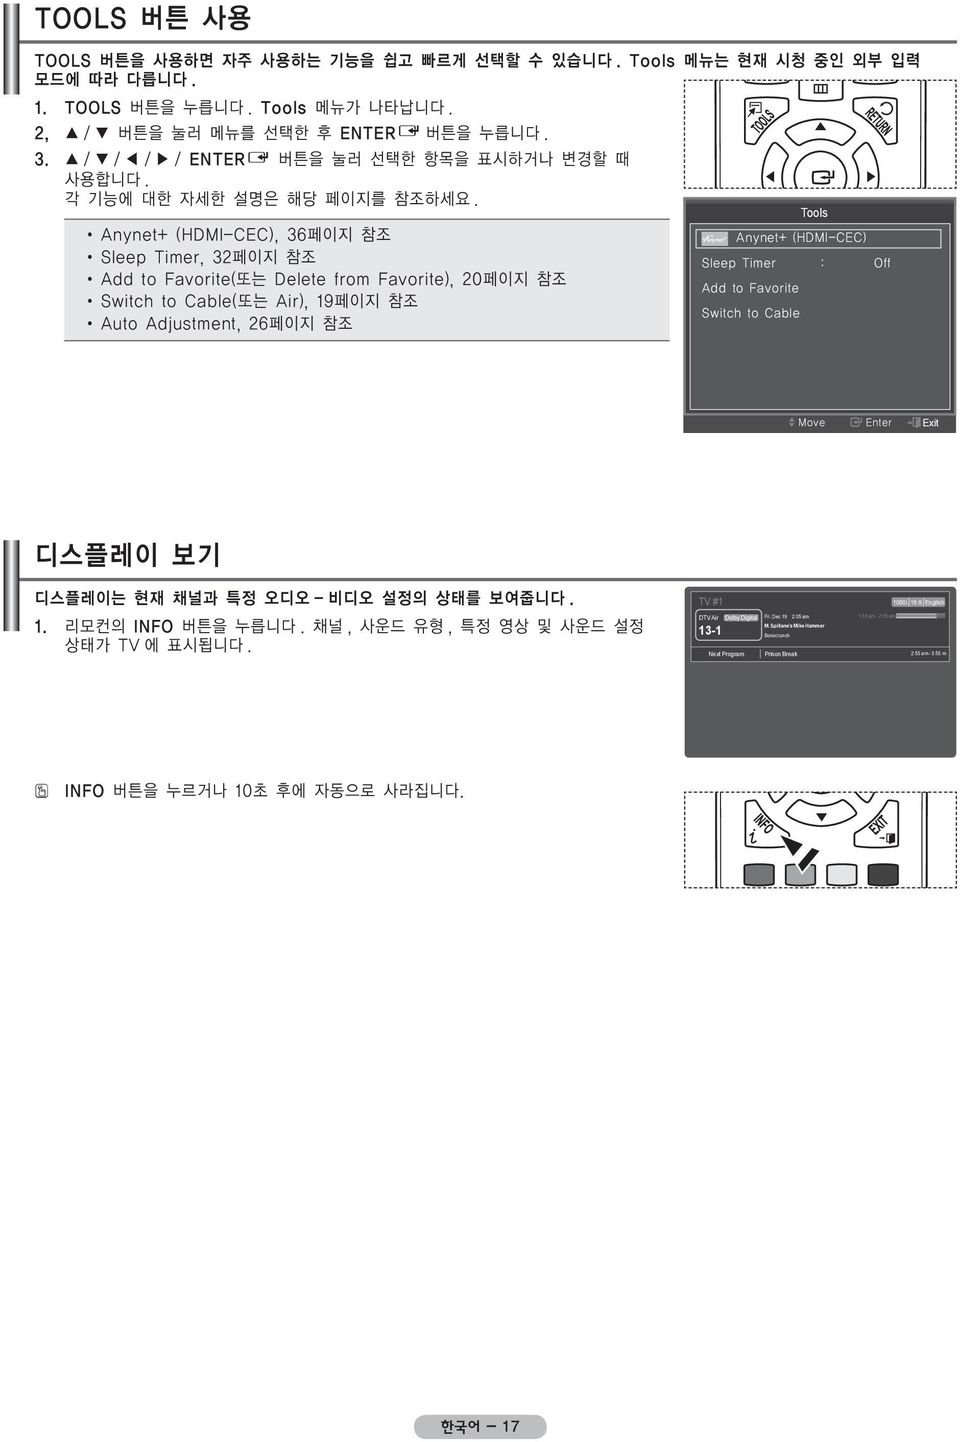 Tools Anynet+ (HDMI-CEC), 36페이지 참조 Anynet+ (HDMI-CEC) Sleep Timer, 32페이지 참조 Sleep Timer : Off Add to Favorite(또는 Delete from Favorite), 20페이지 참조 Add to Favorite Switch to Cable(또는 Air), 19페이지 참조